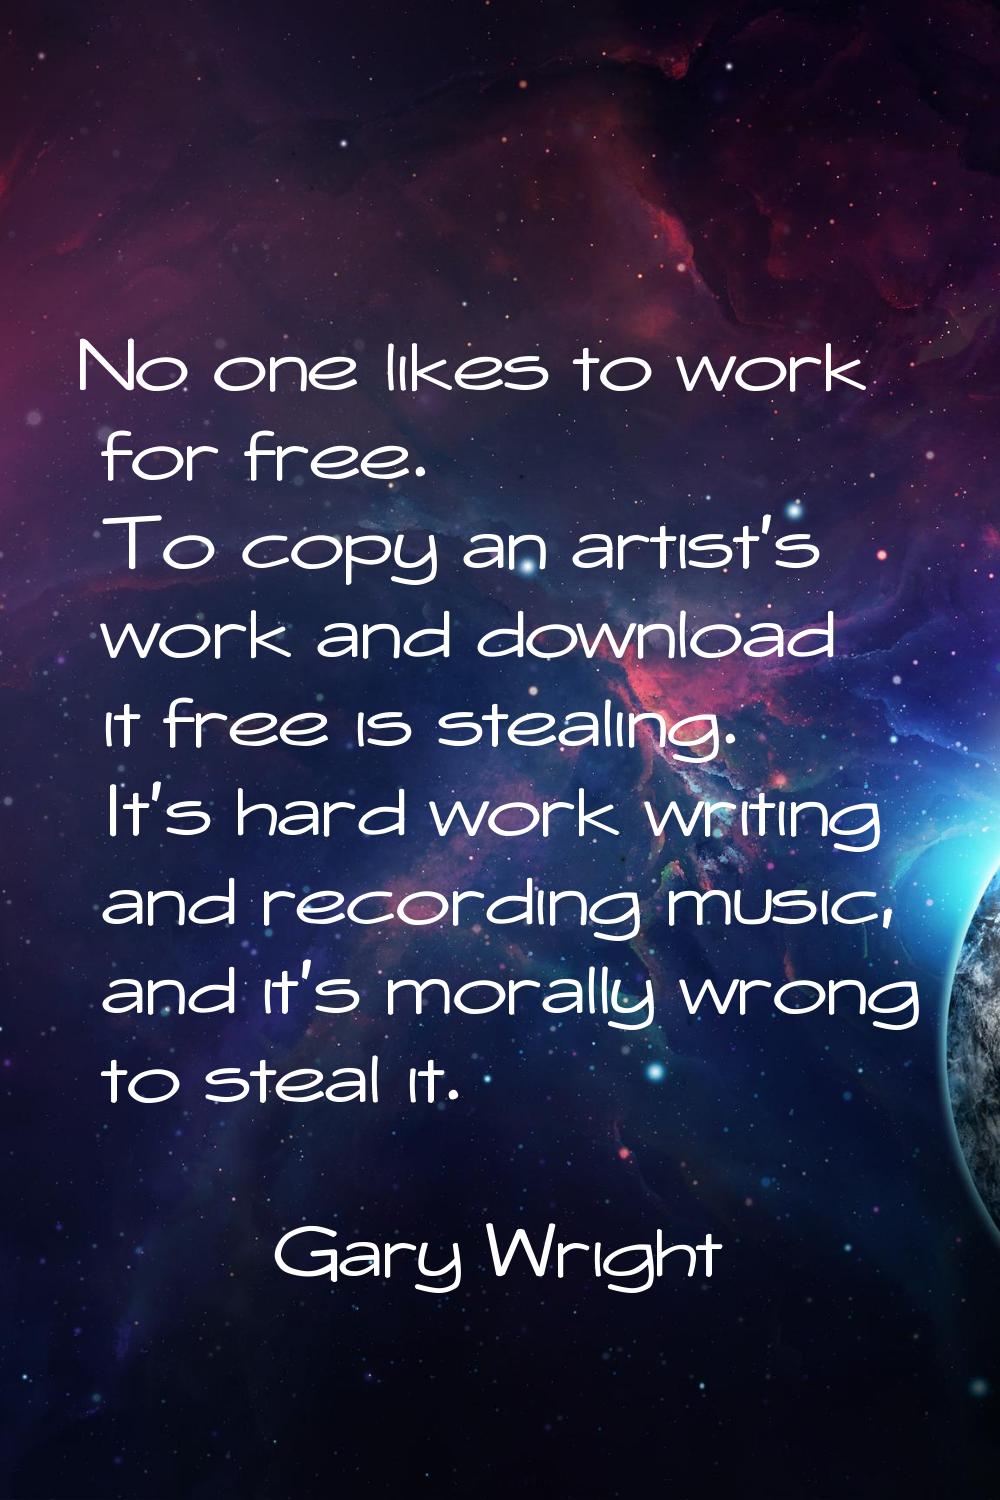 No one likes to work for free. To copy an artist's work and download it free is stealing. It's hard